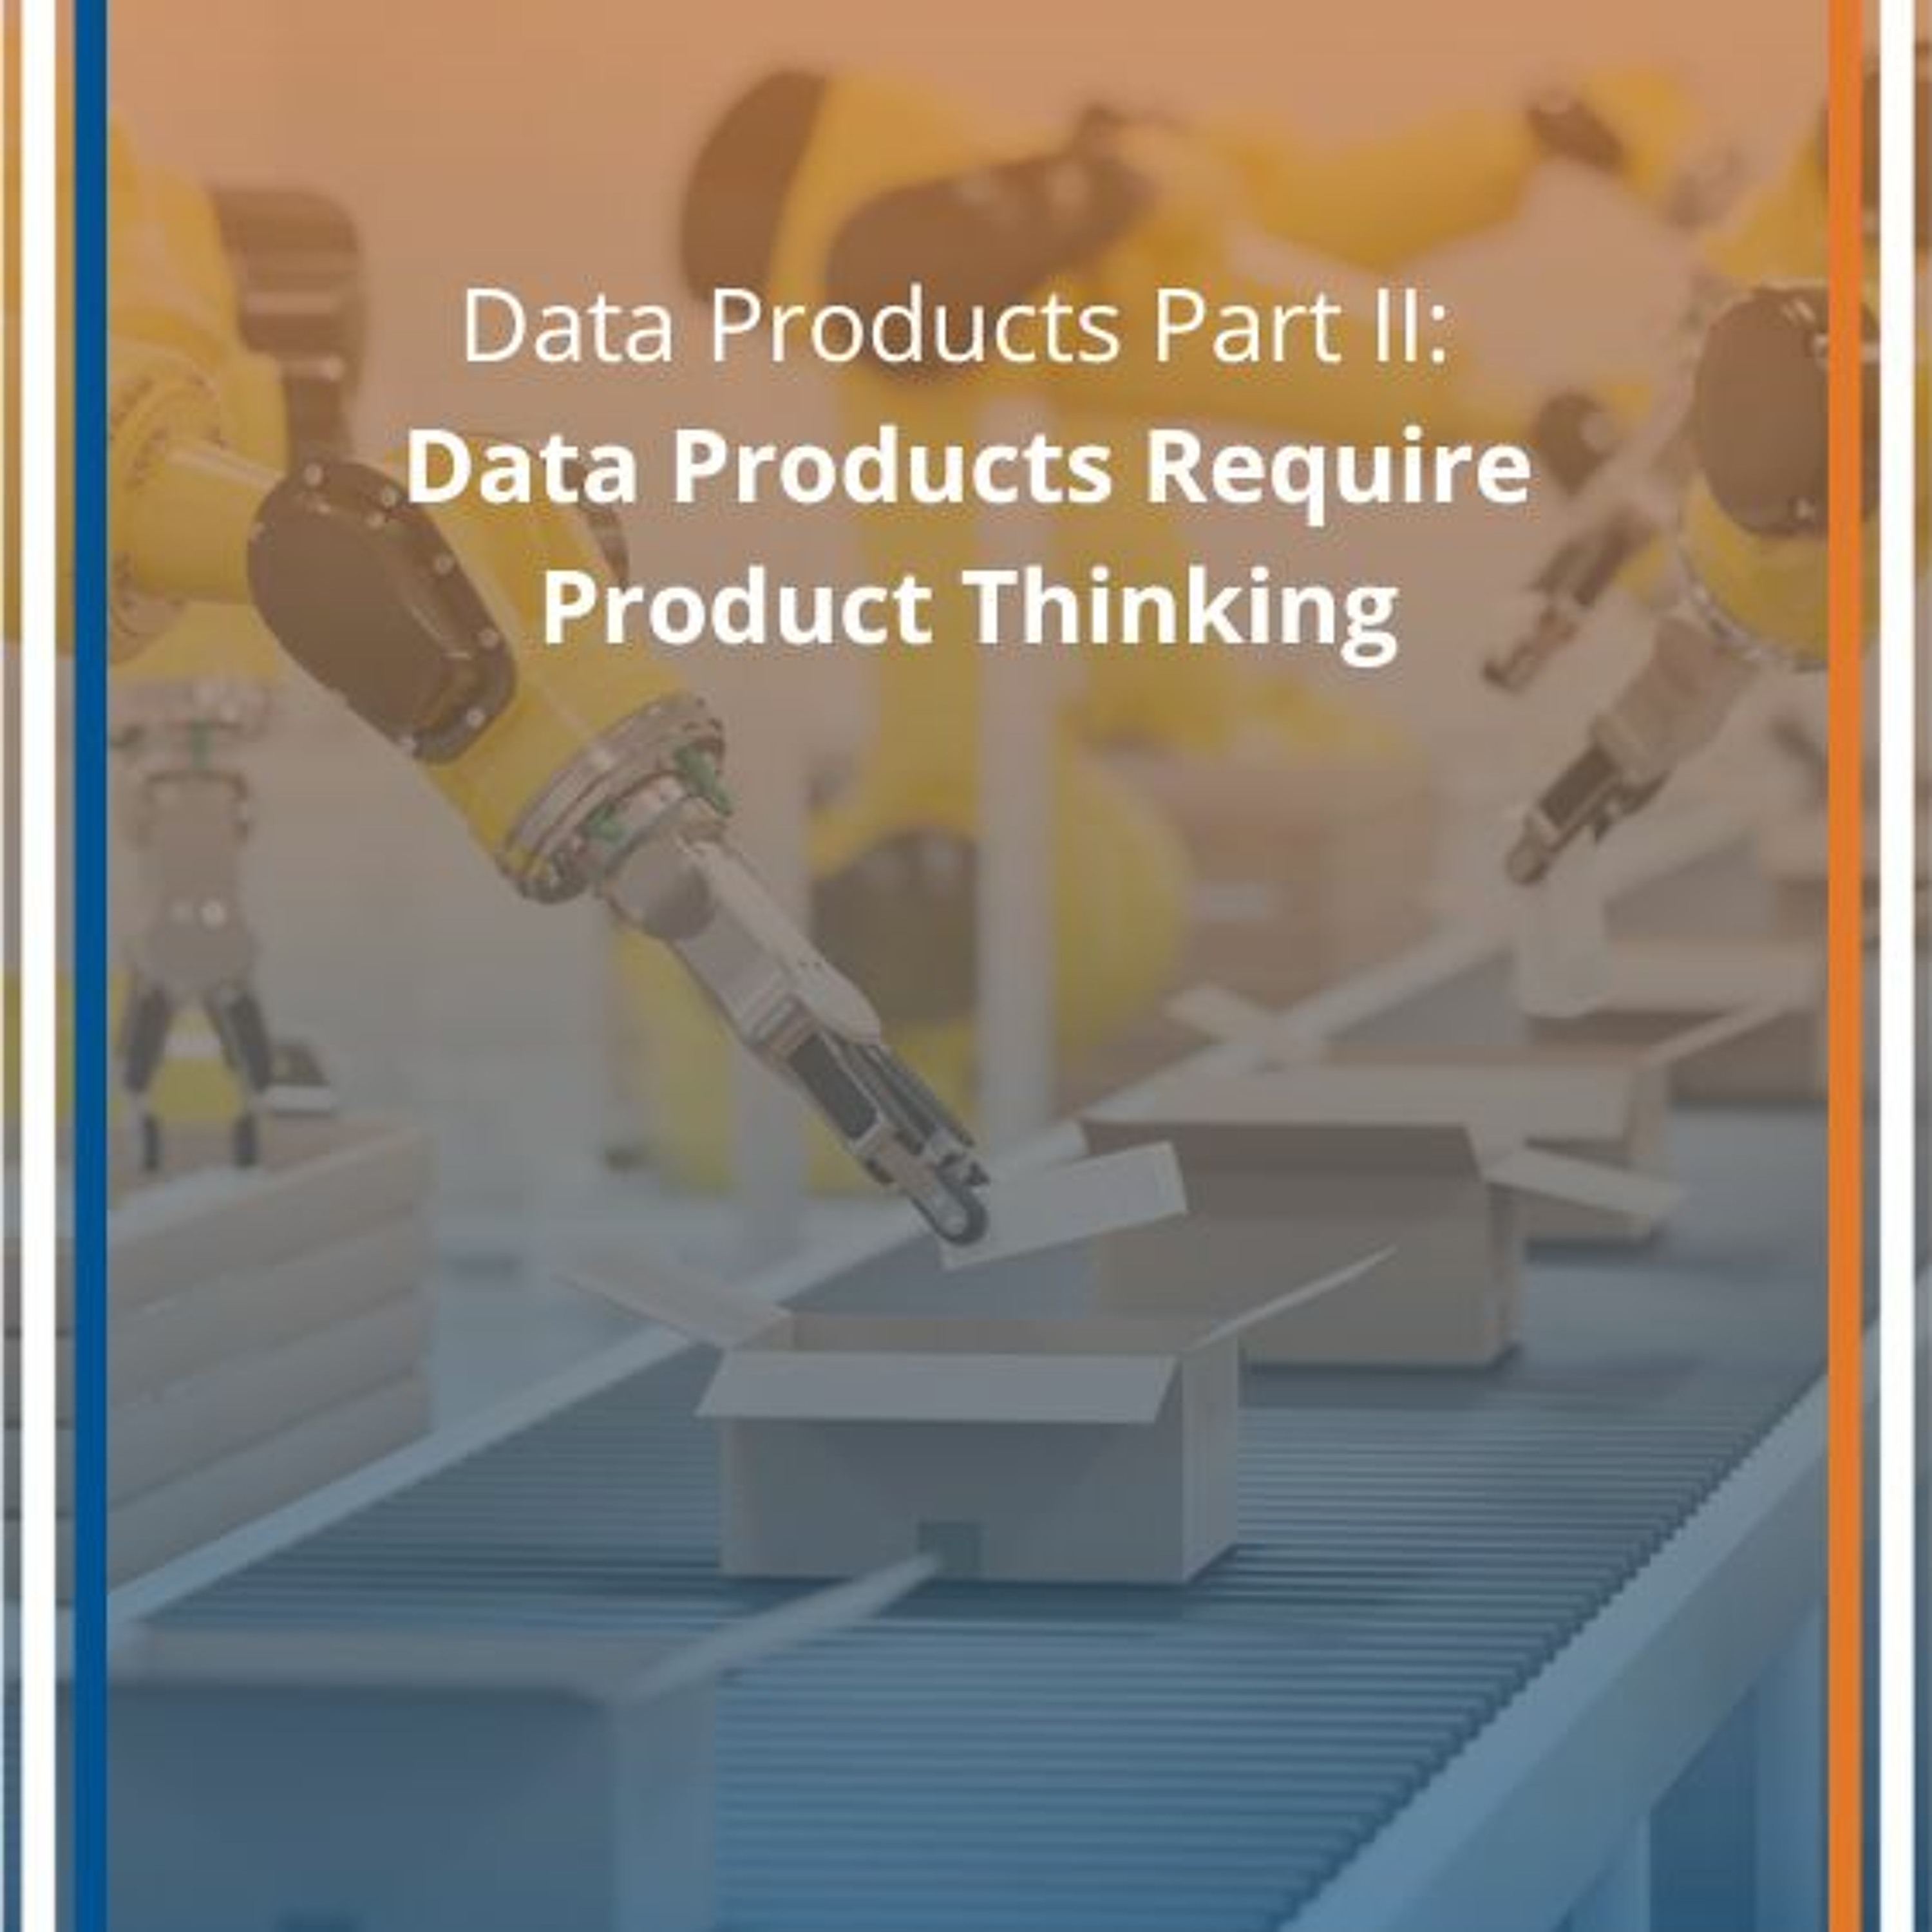 Data Products Part II: Data Products Require Product Thinking - Audio Blog